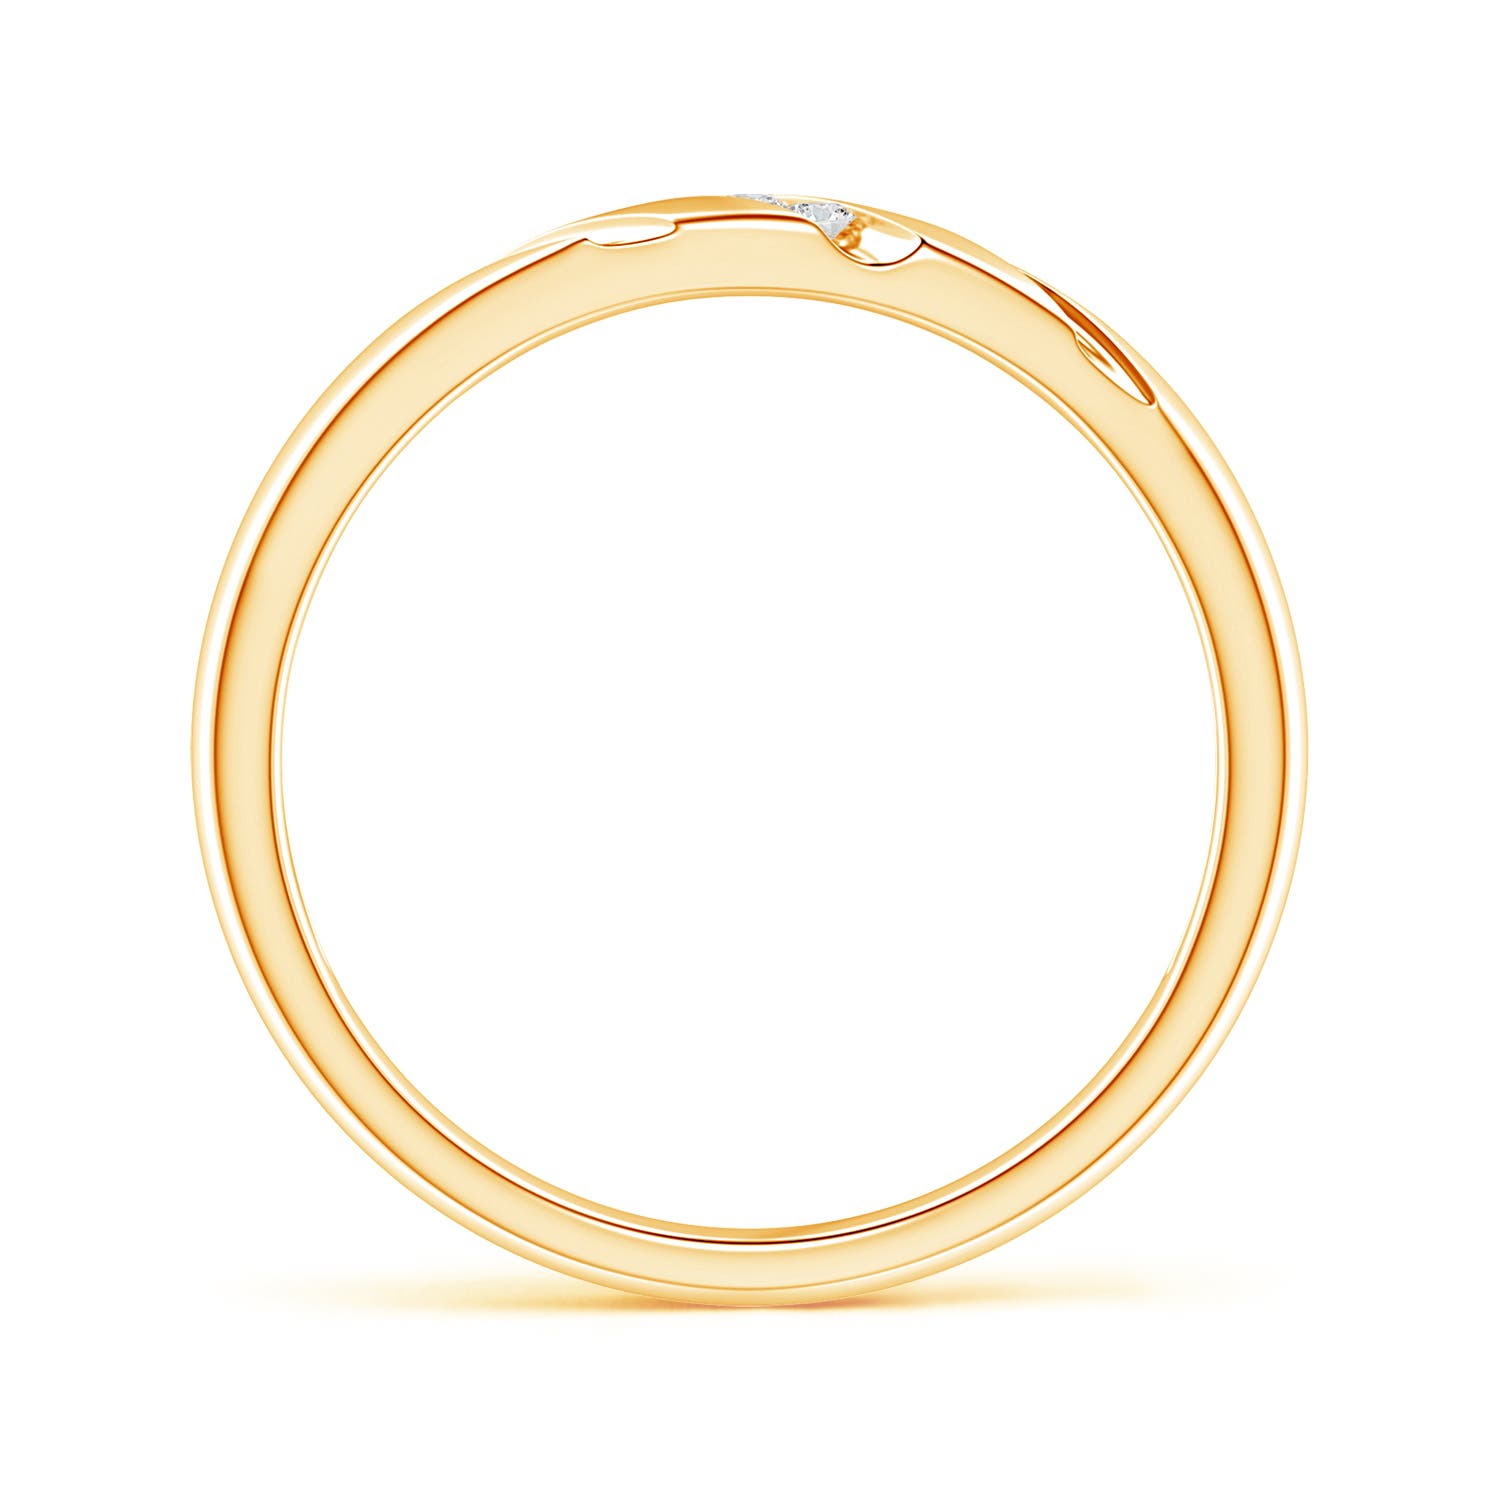 H, SI2 / 0.04 CT / 14 KT Yellow Gold